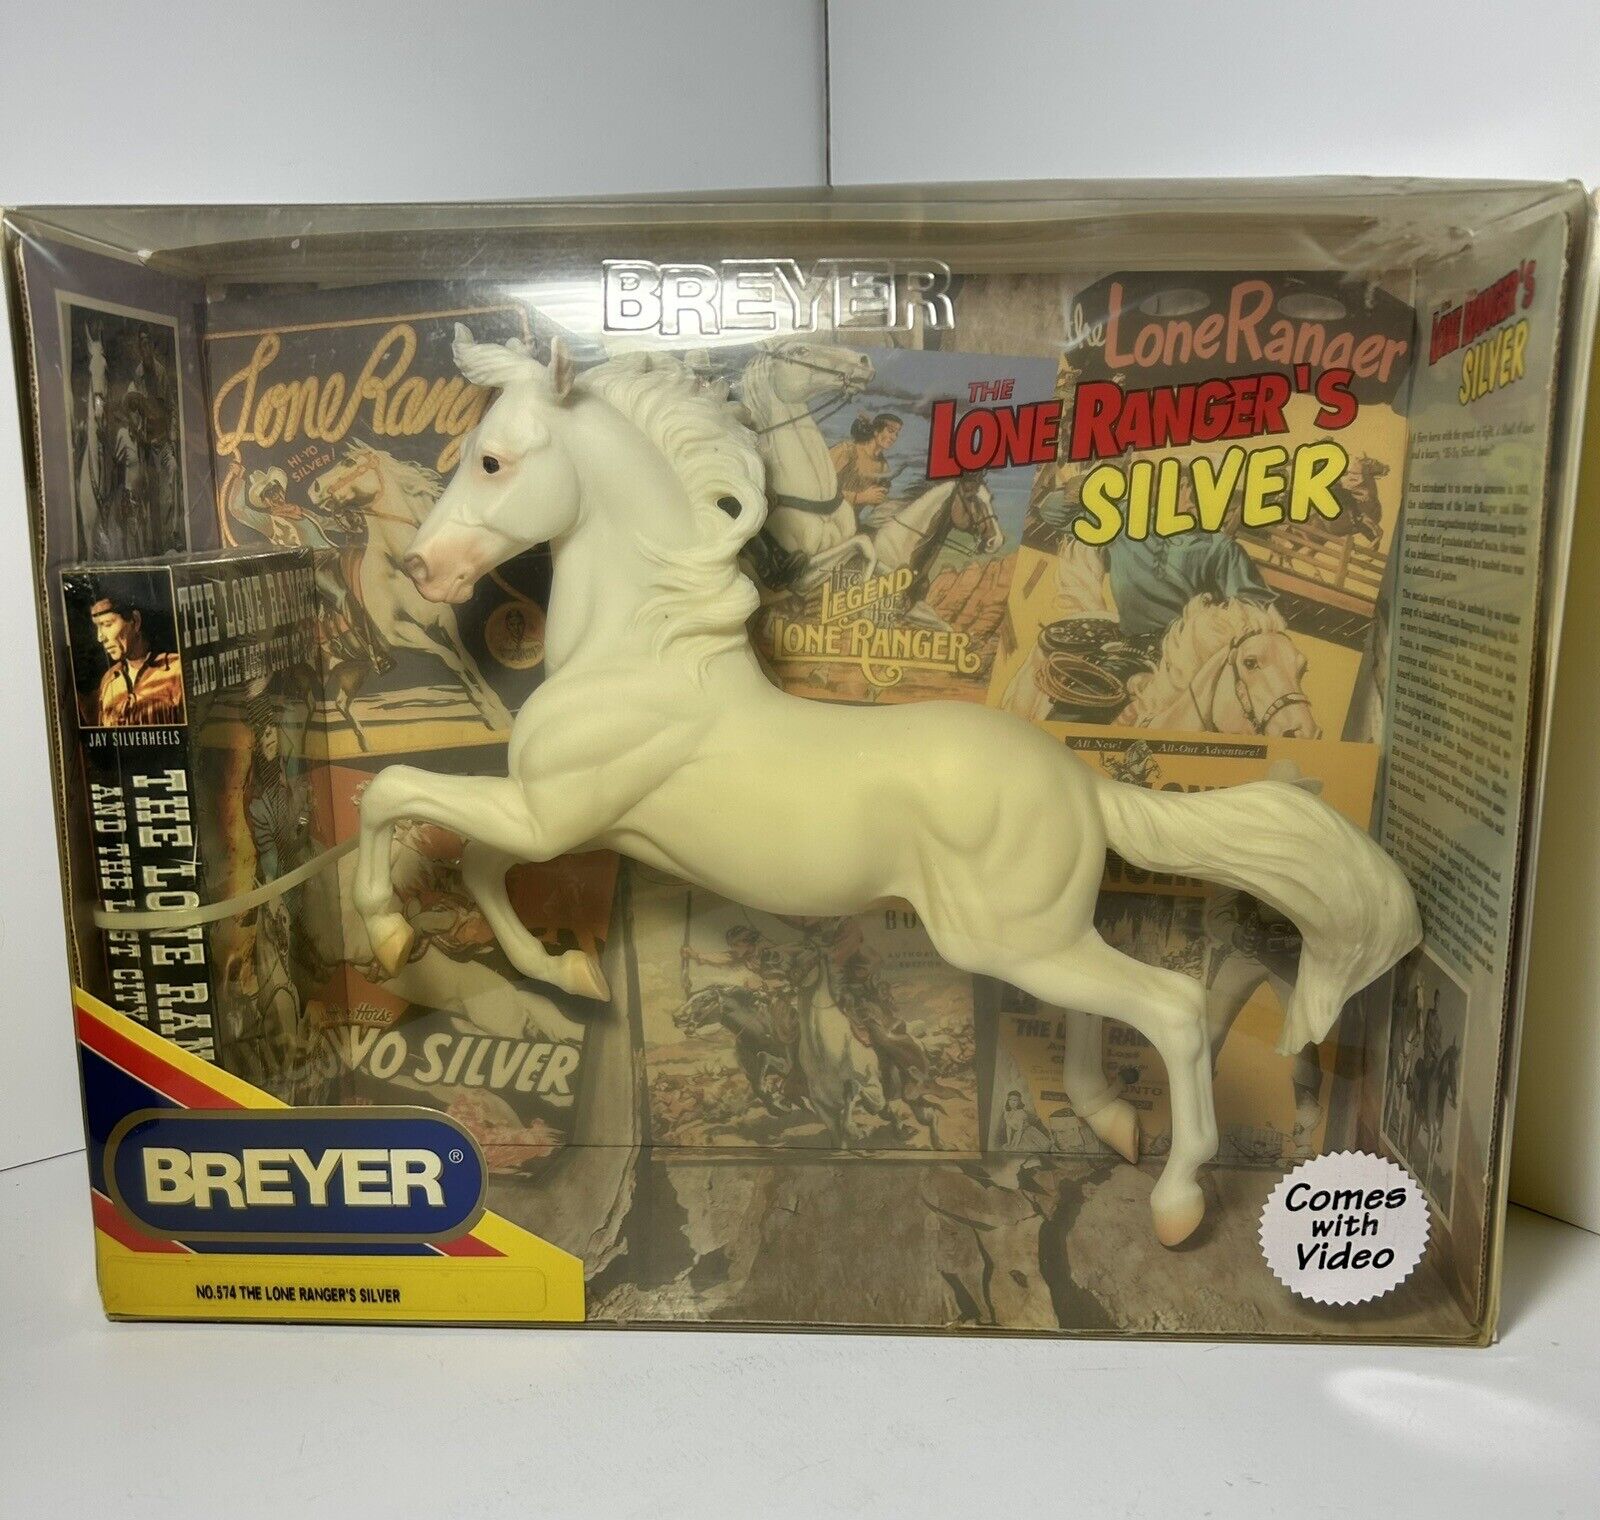 Breyer Retired 574 The Lone Rangers Silver With Video 